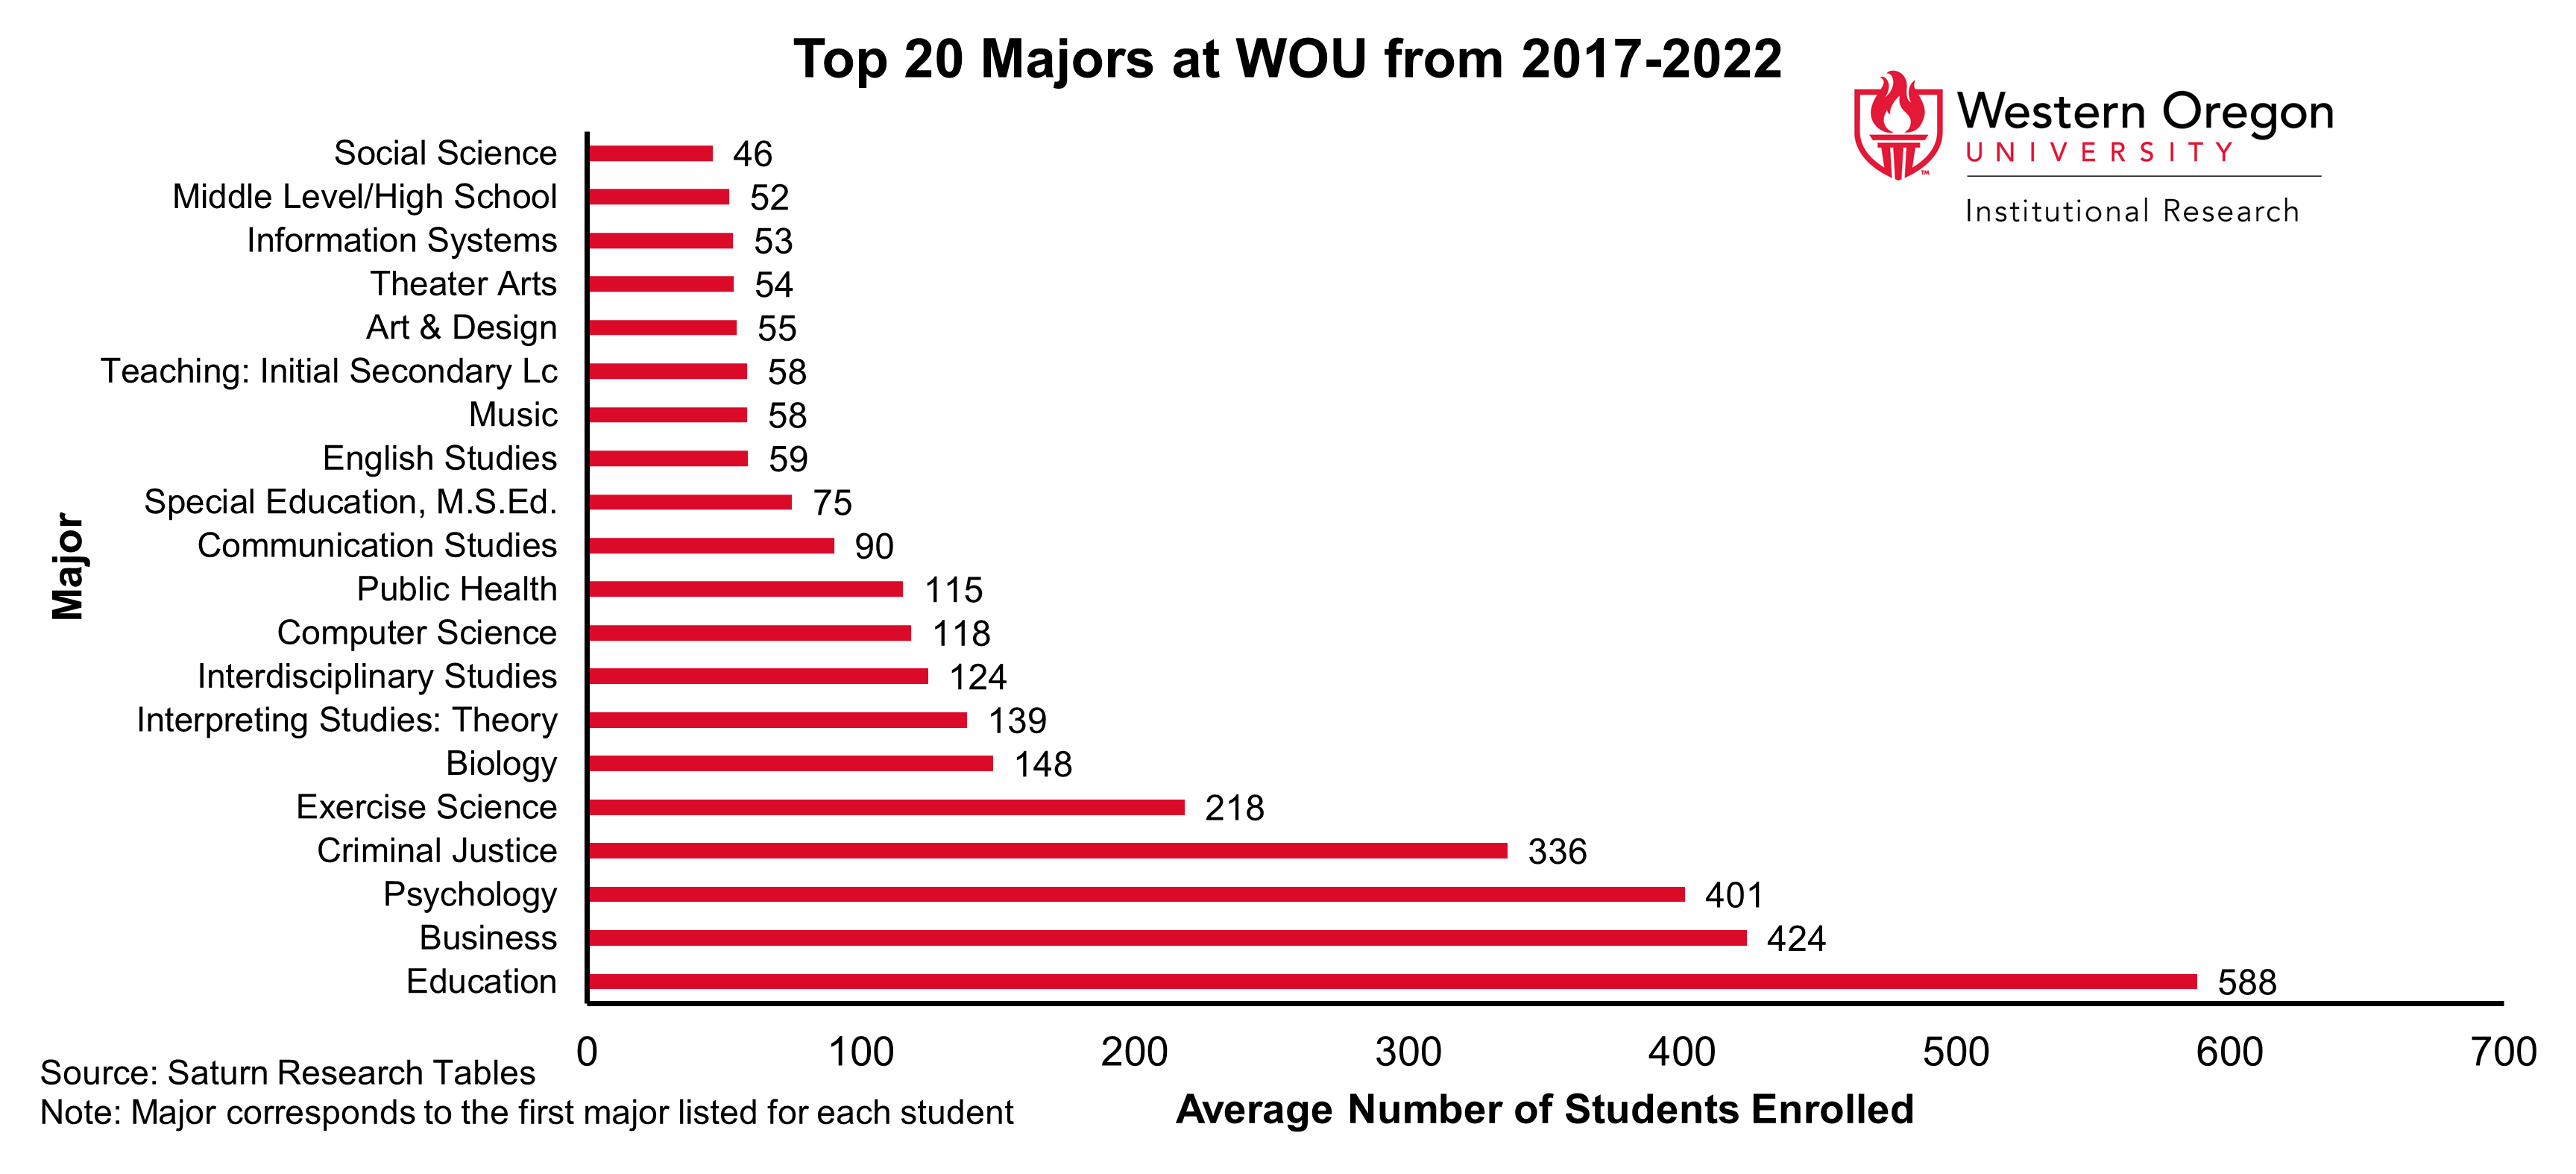 Bar graph of the top 20 majors at WOU between 2017 and 2022, showing that Education, Business, and Psychology are the majors with the largest number of students enrolled